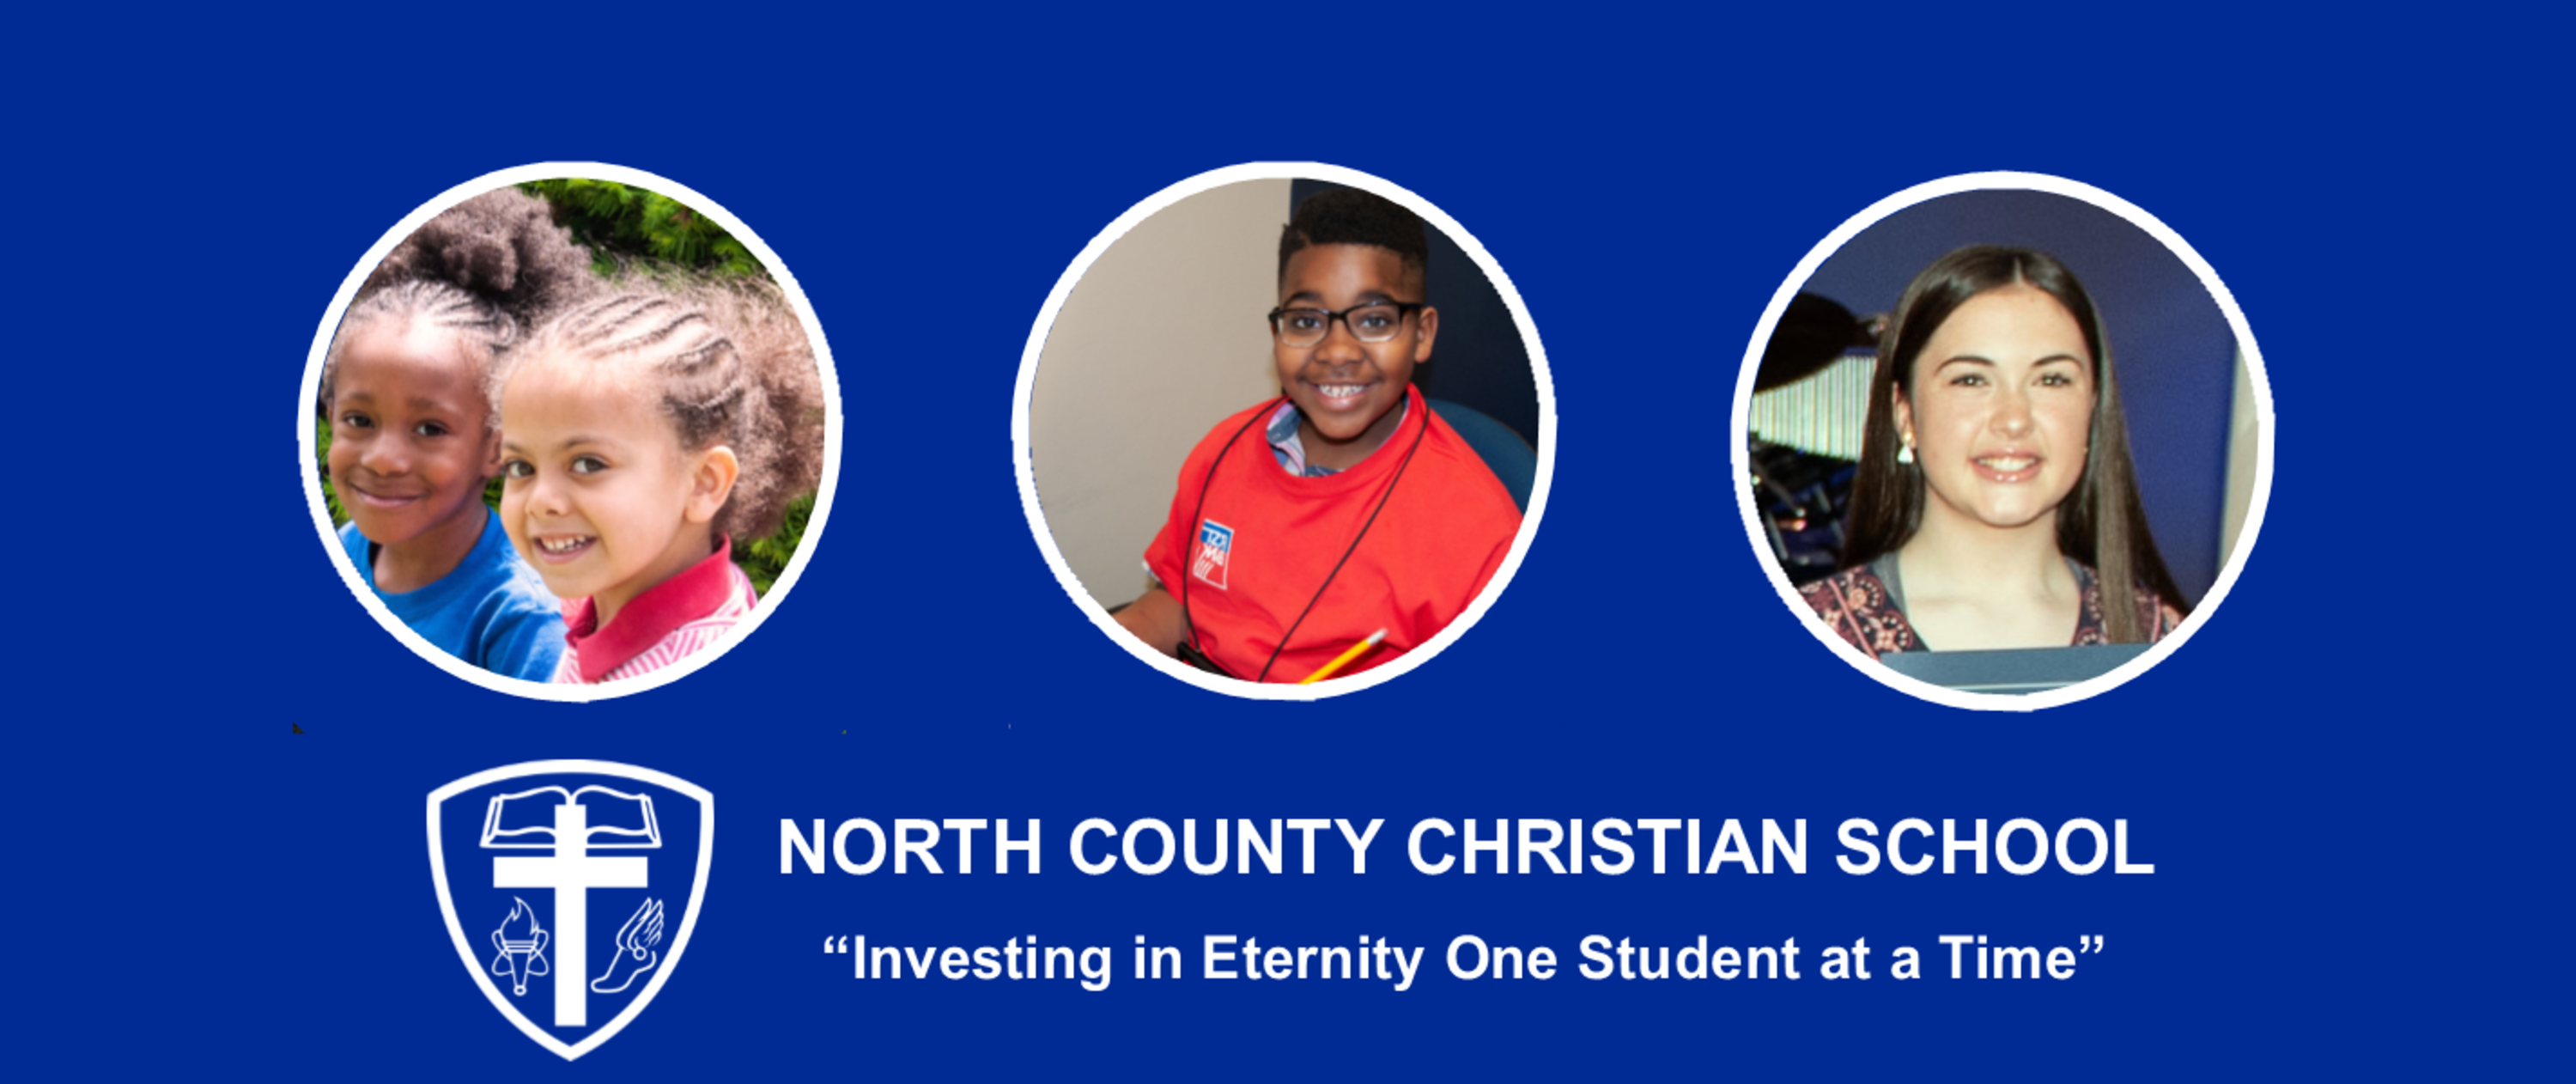 North County Christian School "Investing in Eternity One Student at a Time"